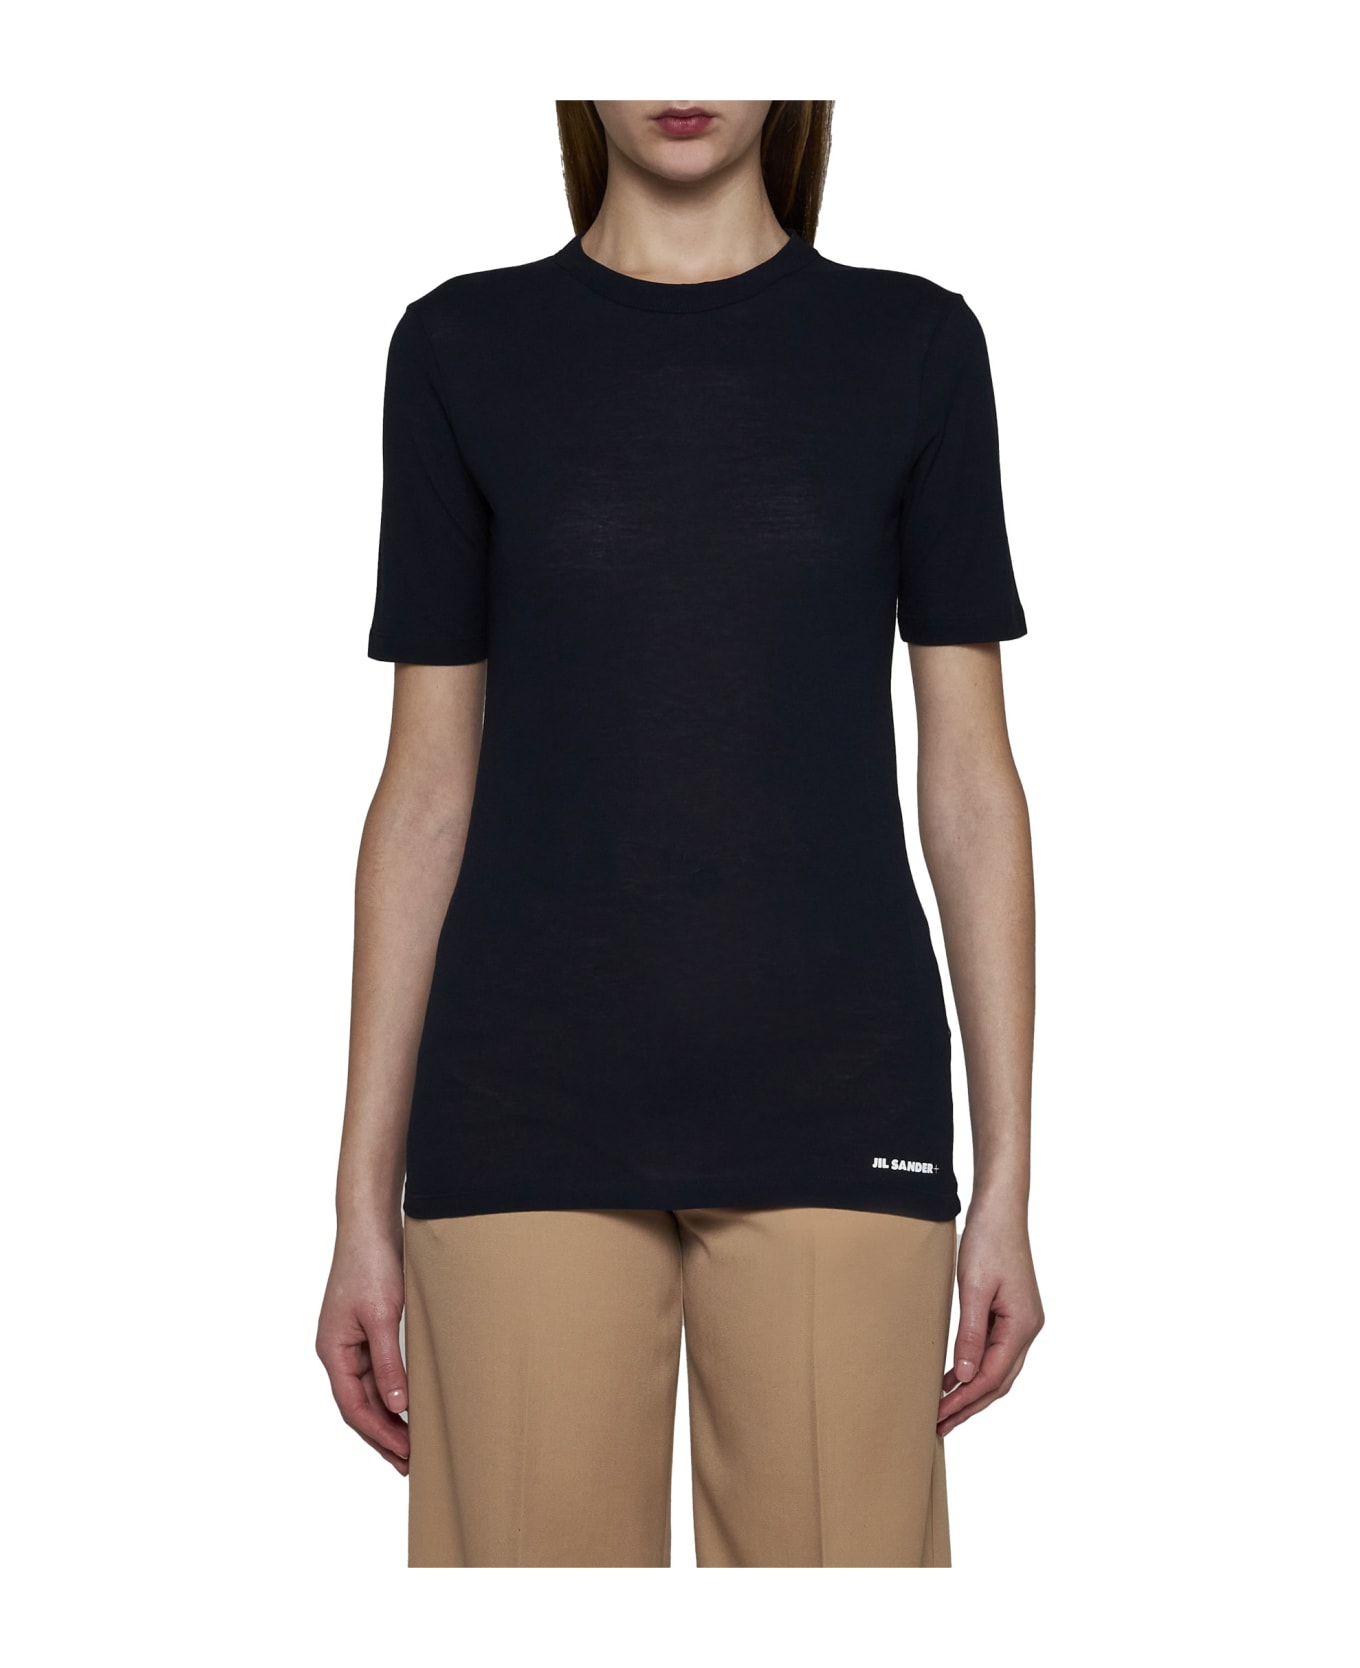 Jil Sander Night Blue Cotton Jersey Regular T-shirt By Ganni With Sleeve And Front Print. - Midnight Tシャツ